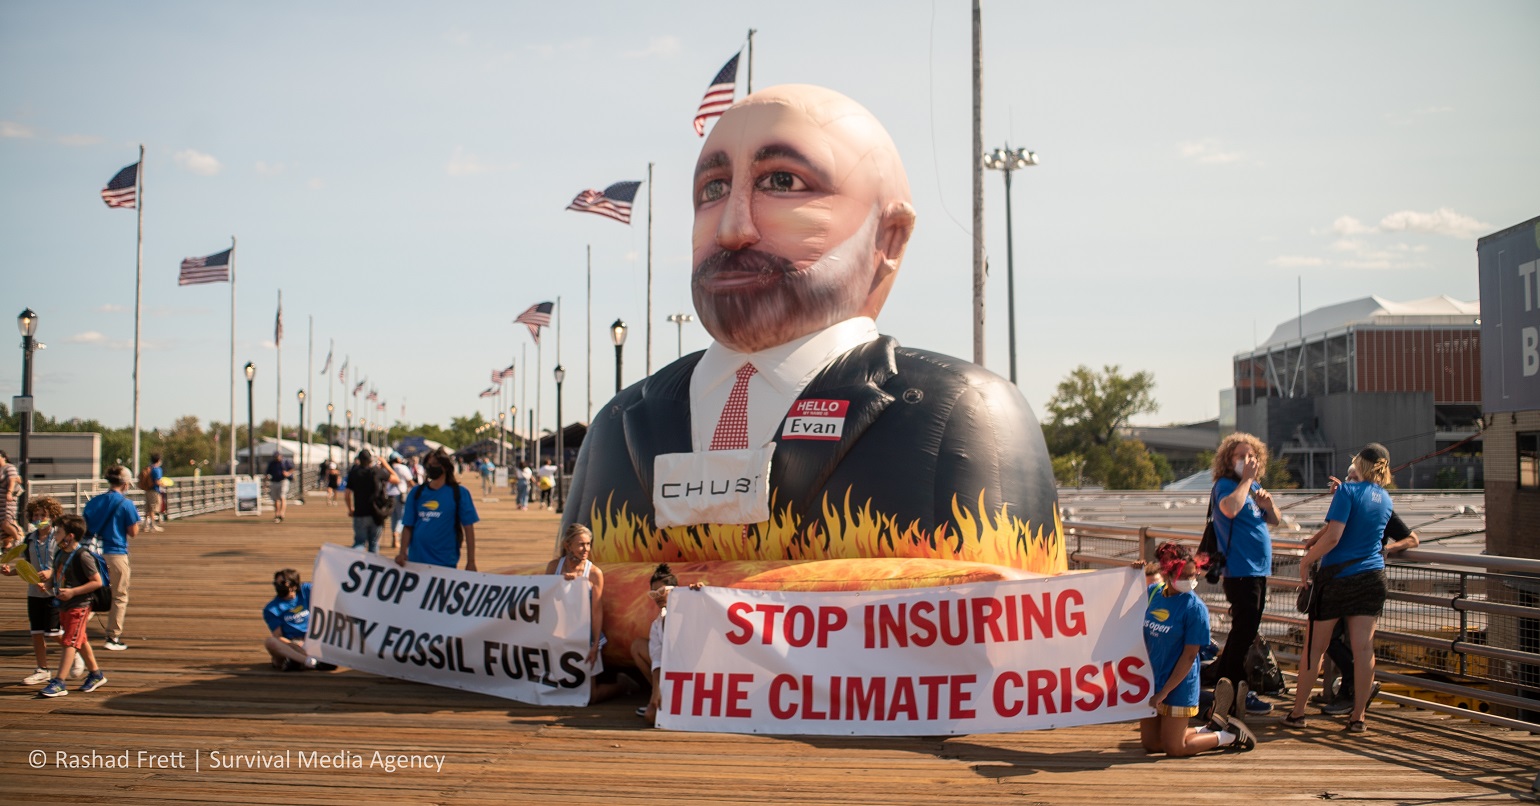 A photo of a protest calling for Chubb to stop insuring fossil fuels